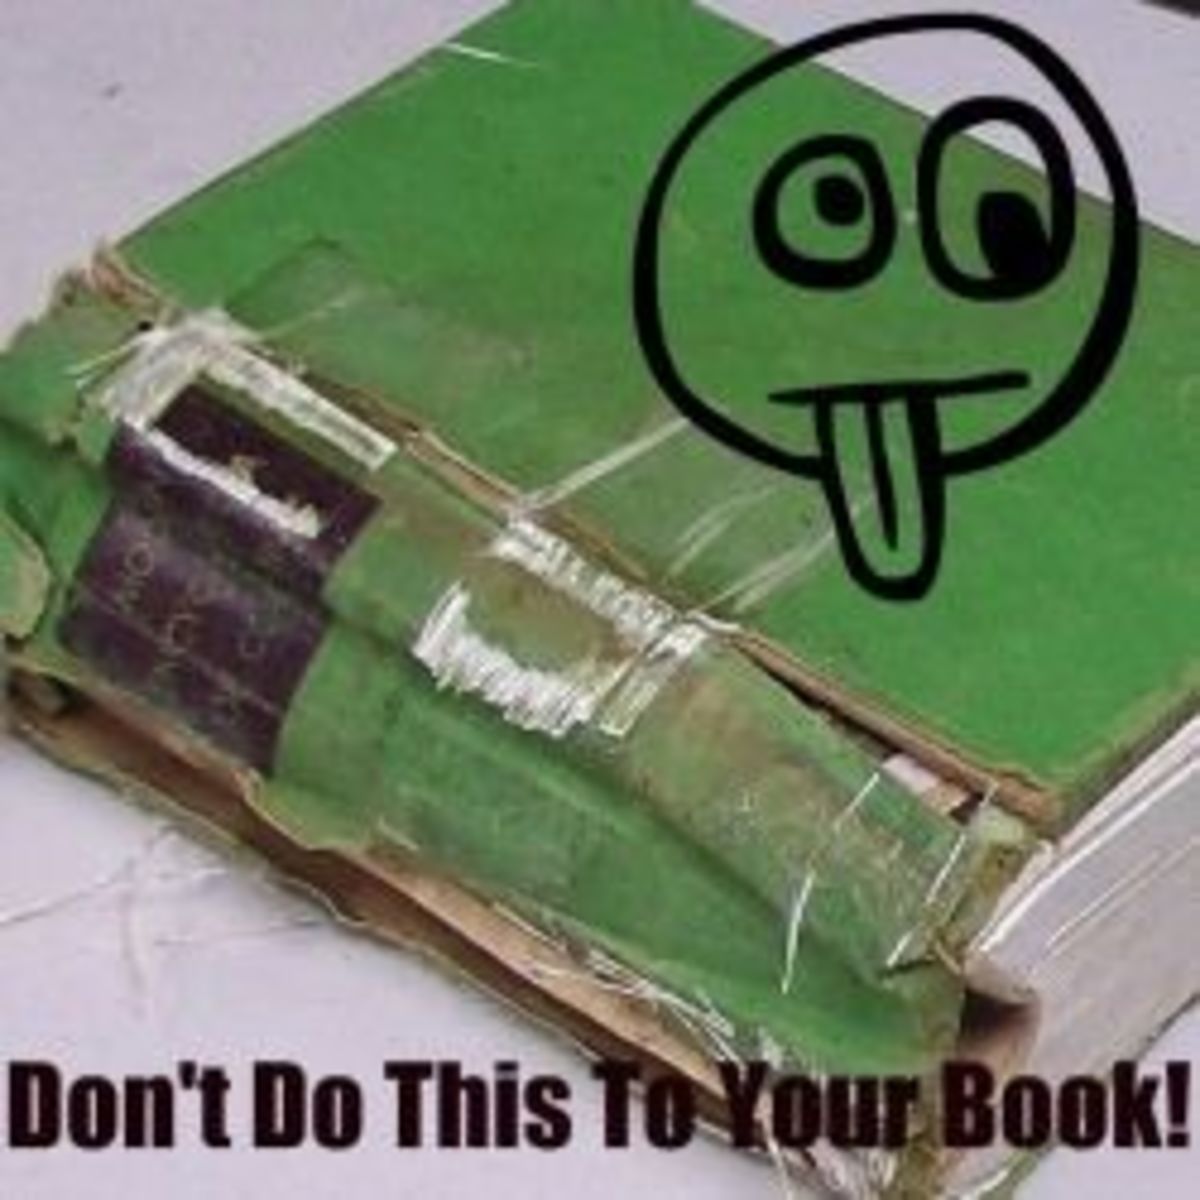 The above photo by Mickie Goad (that's me!) shows how NOT to repair a book!